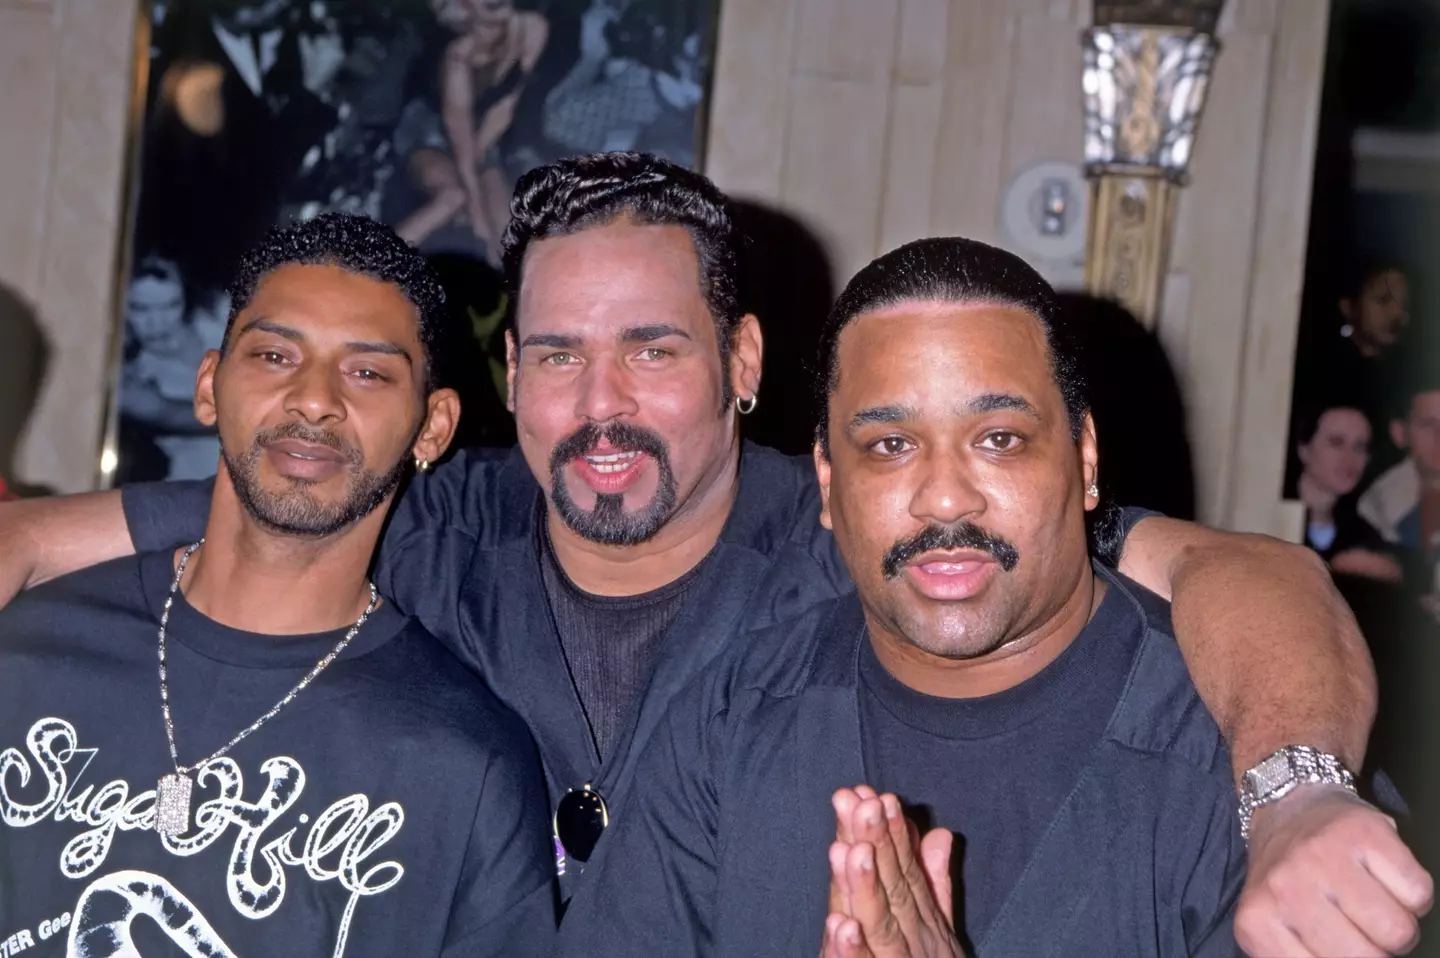 The song is based on 'Rapper's Delight' by The Sugarhill Gang.